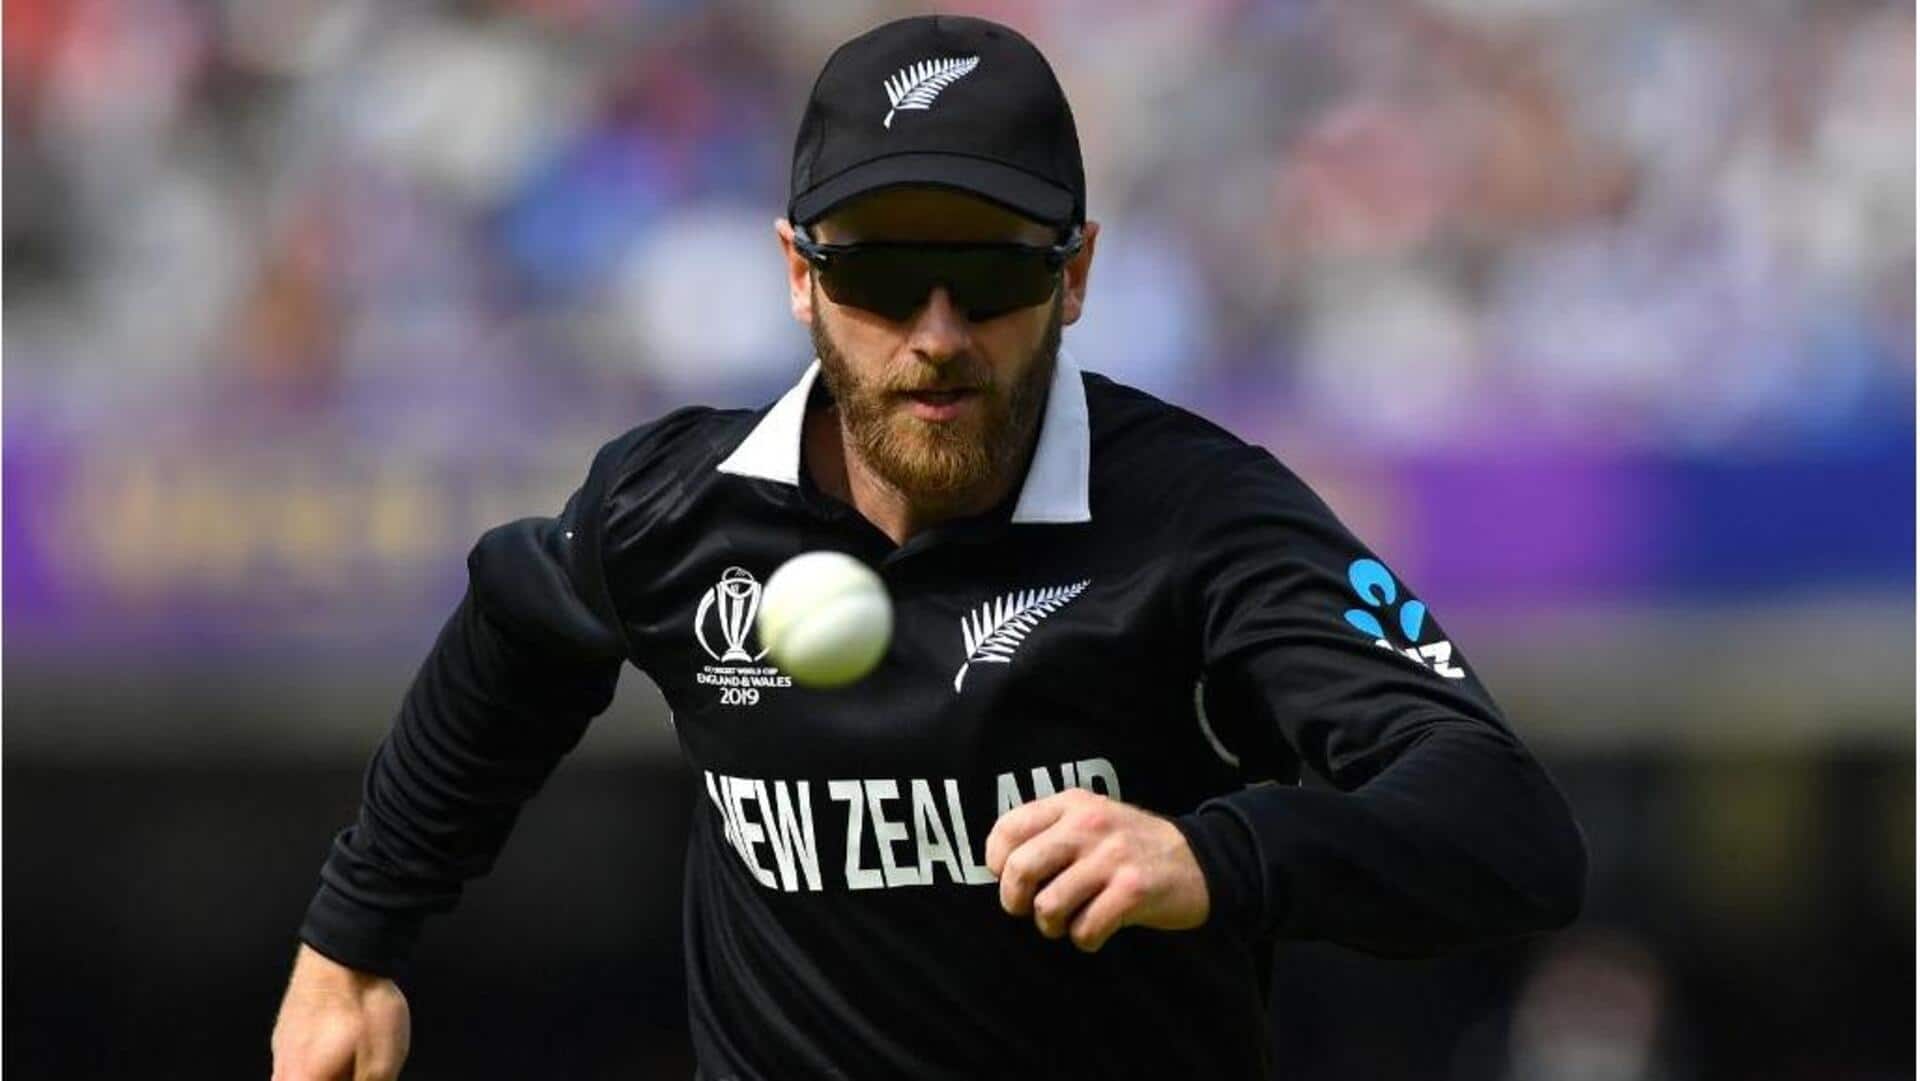 Lesser-known records of Kane Williamson in T20I cricket